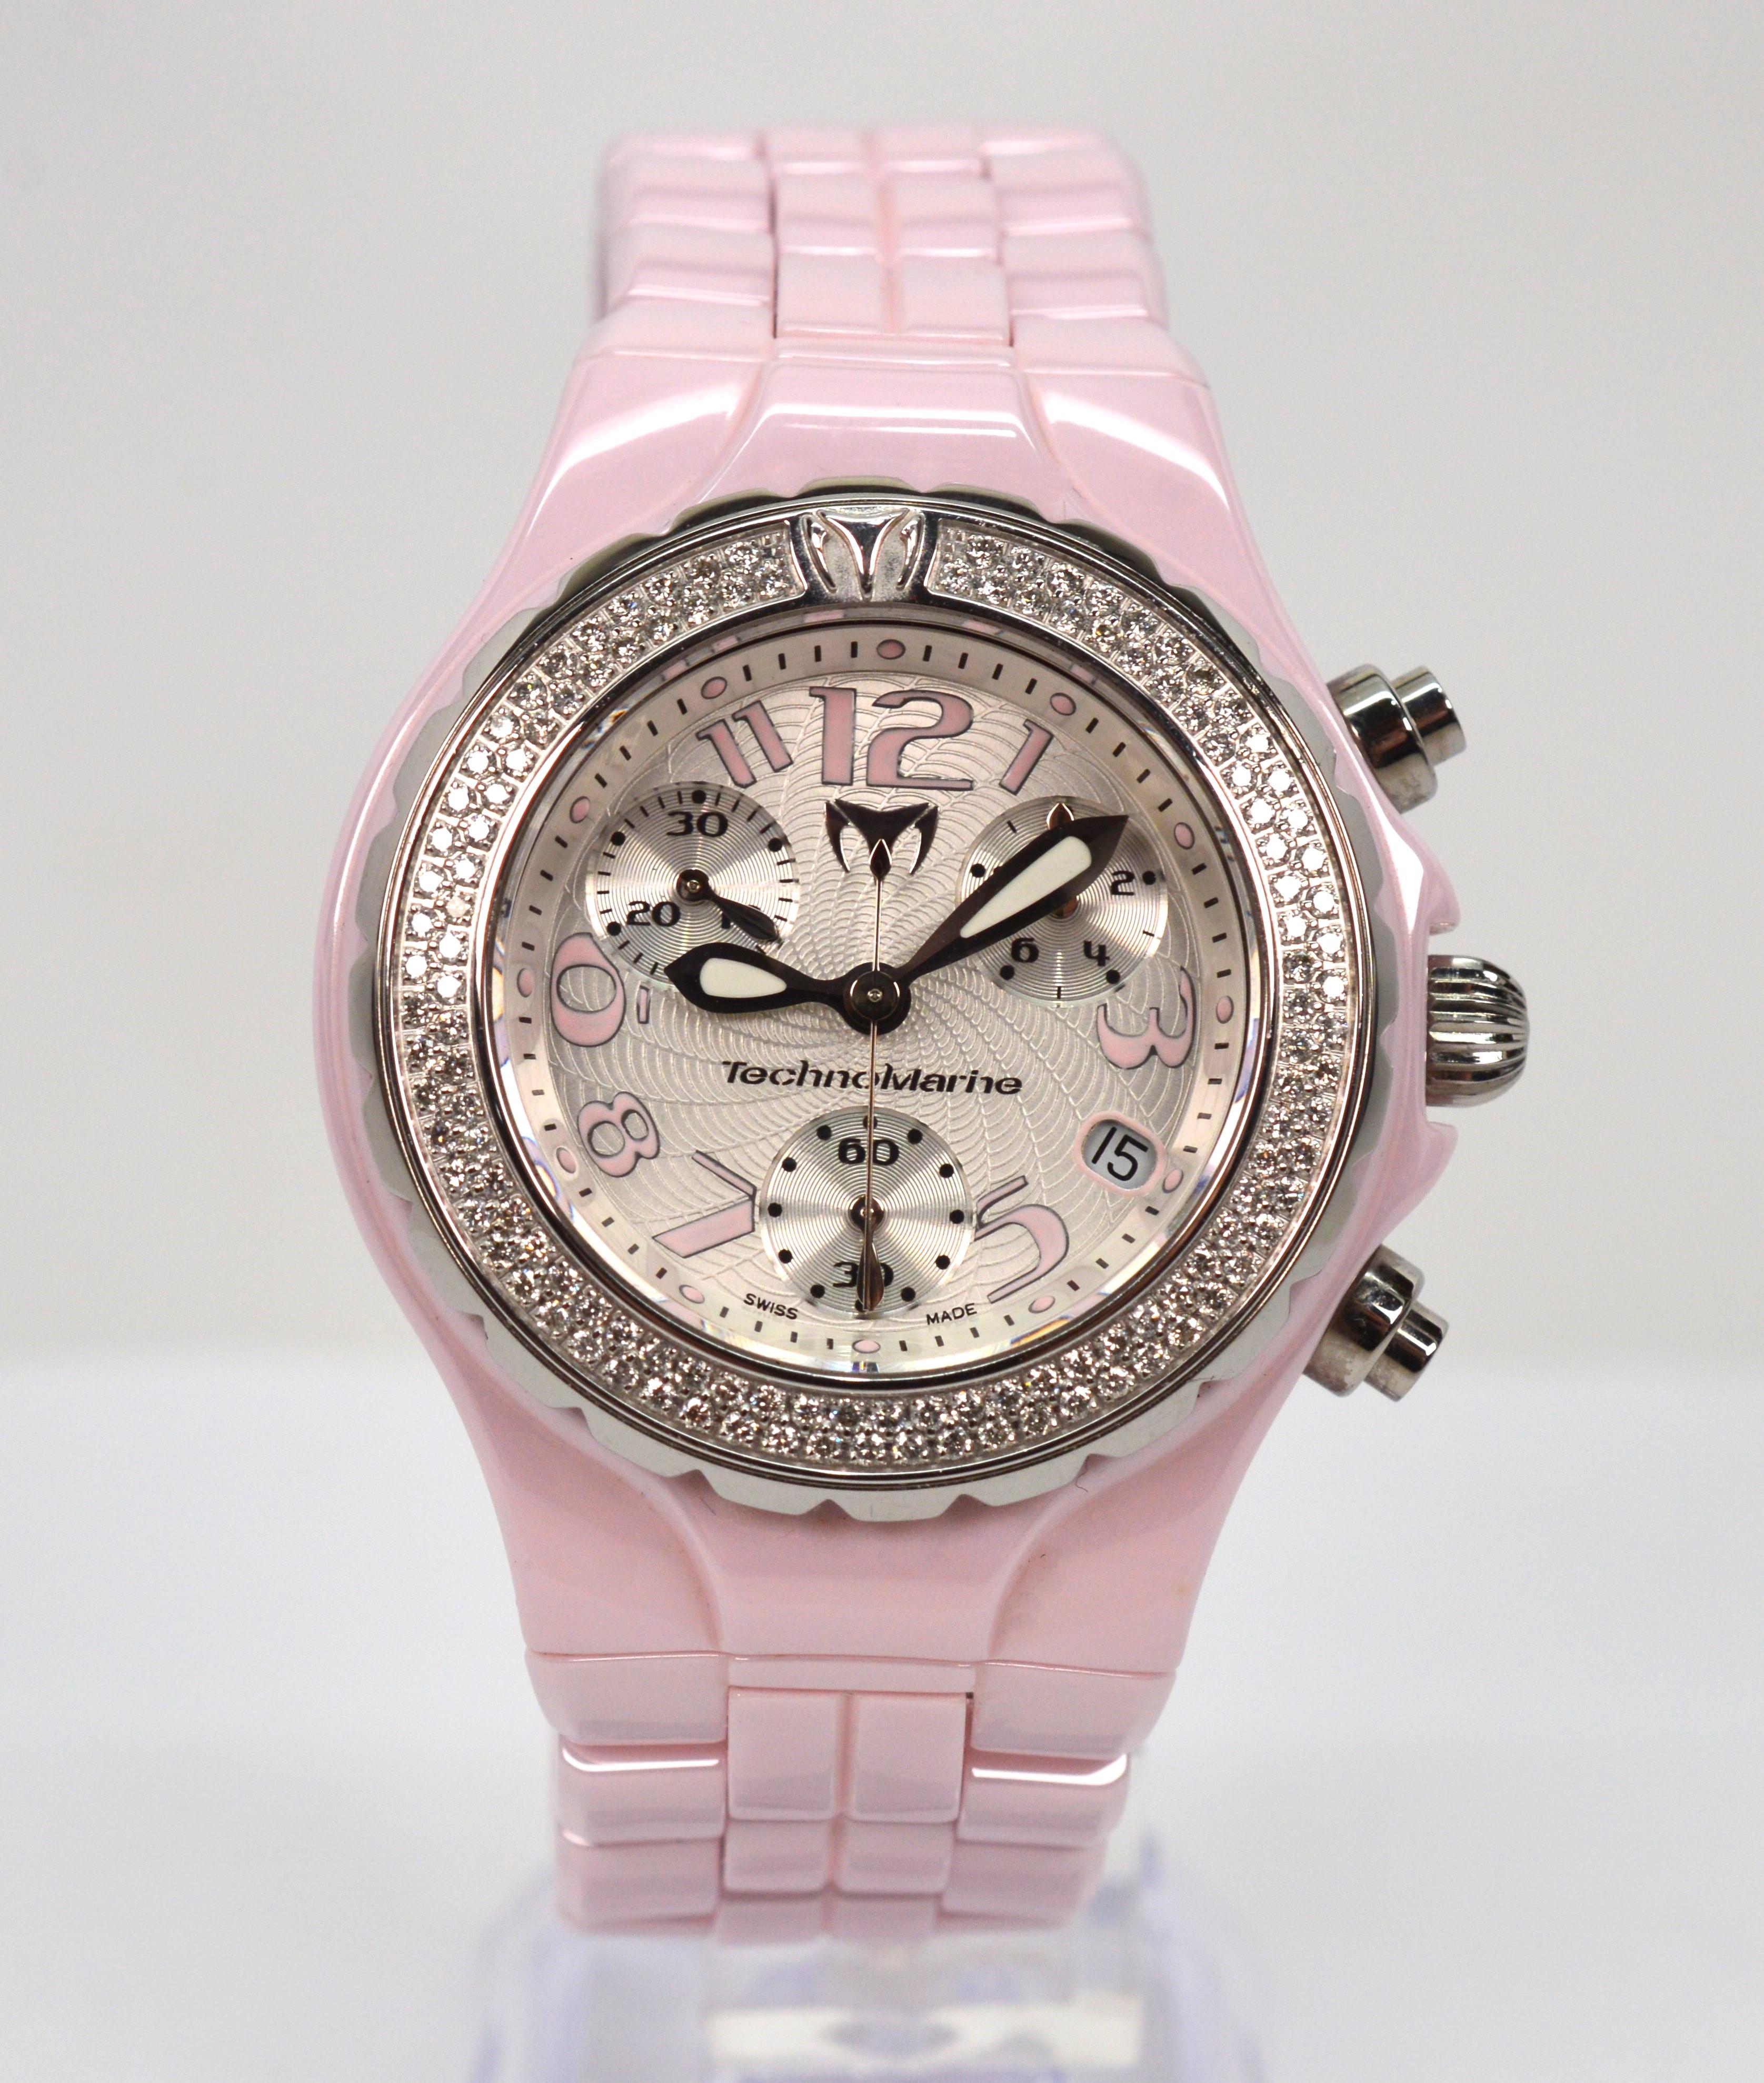 A fresh, bold and exciting timepiece for the ladies by TechnoMarine. The highly polished pink ceramic finish grabs your attention and draws you in to the intricate modern dial framed by a bezel of over 100 white diamonds, .90 ct. TW.  In high